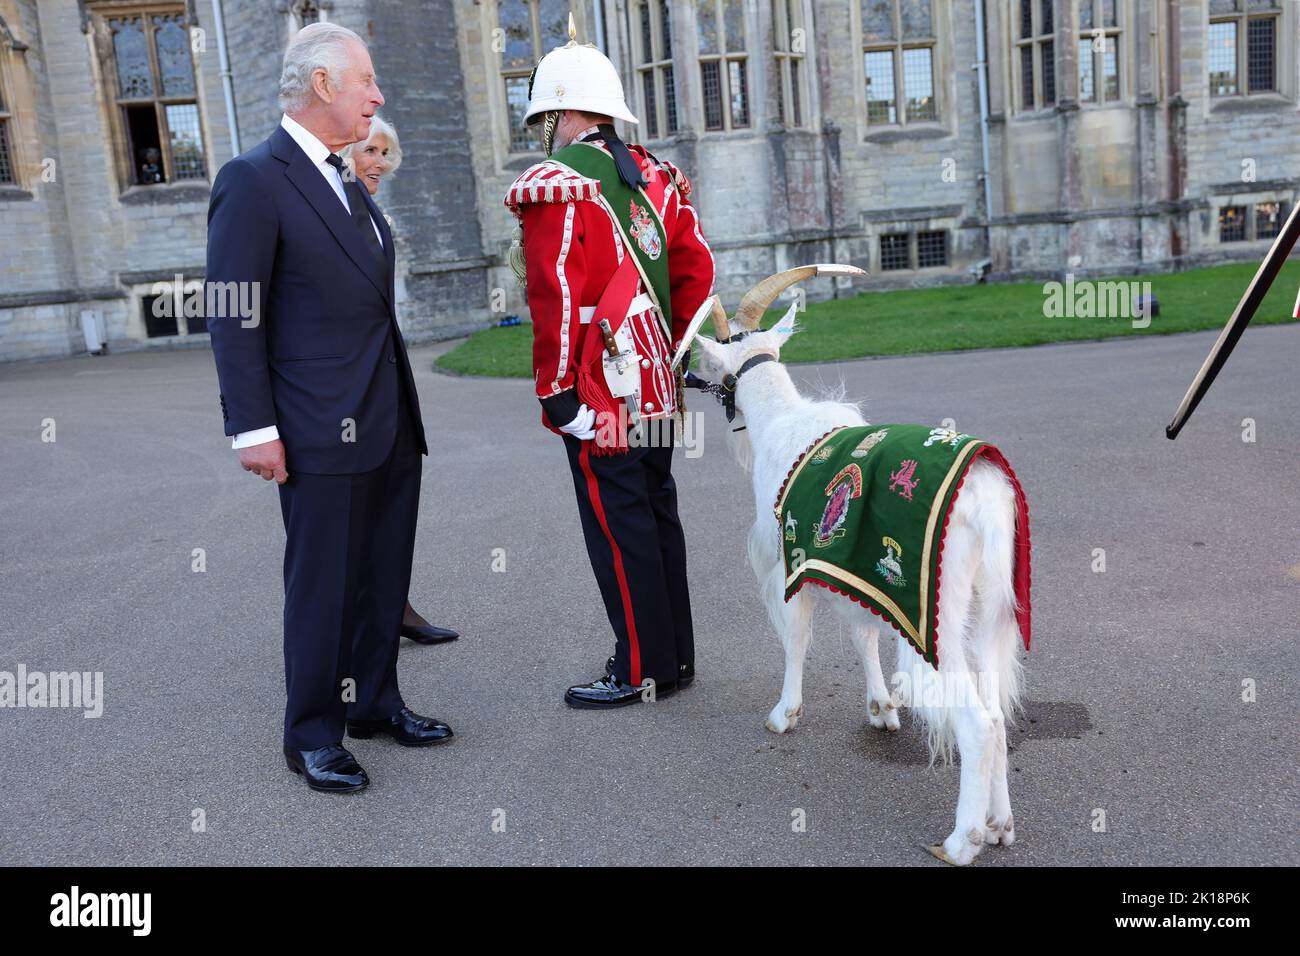 King Charles III and the Queen Consort meet Sheinkin IV, goat mascot for the Royal Welsh Third Battallion at Cardiff Castle in Wales. Picture date: Friday September 16, 2022. Stock Photo